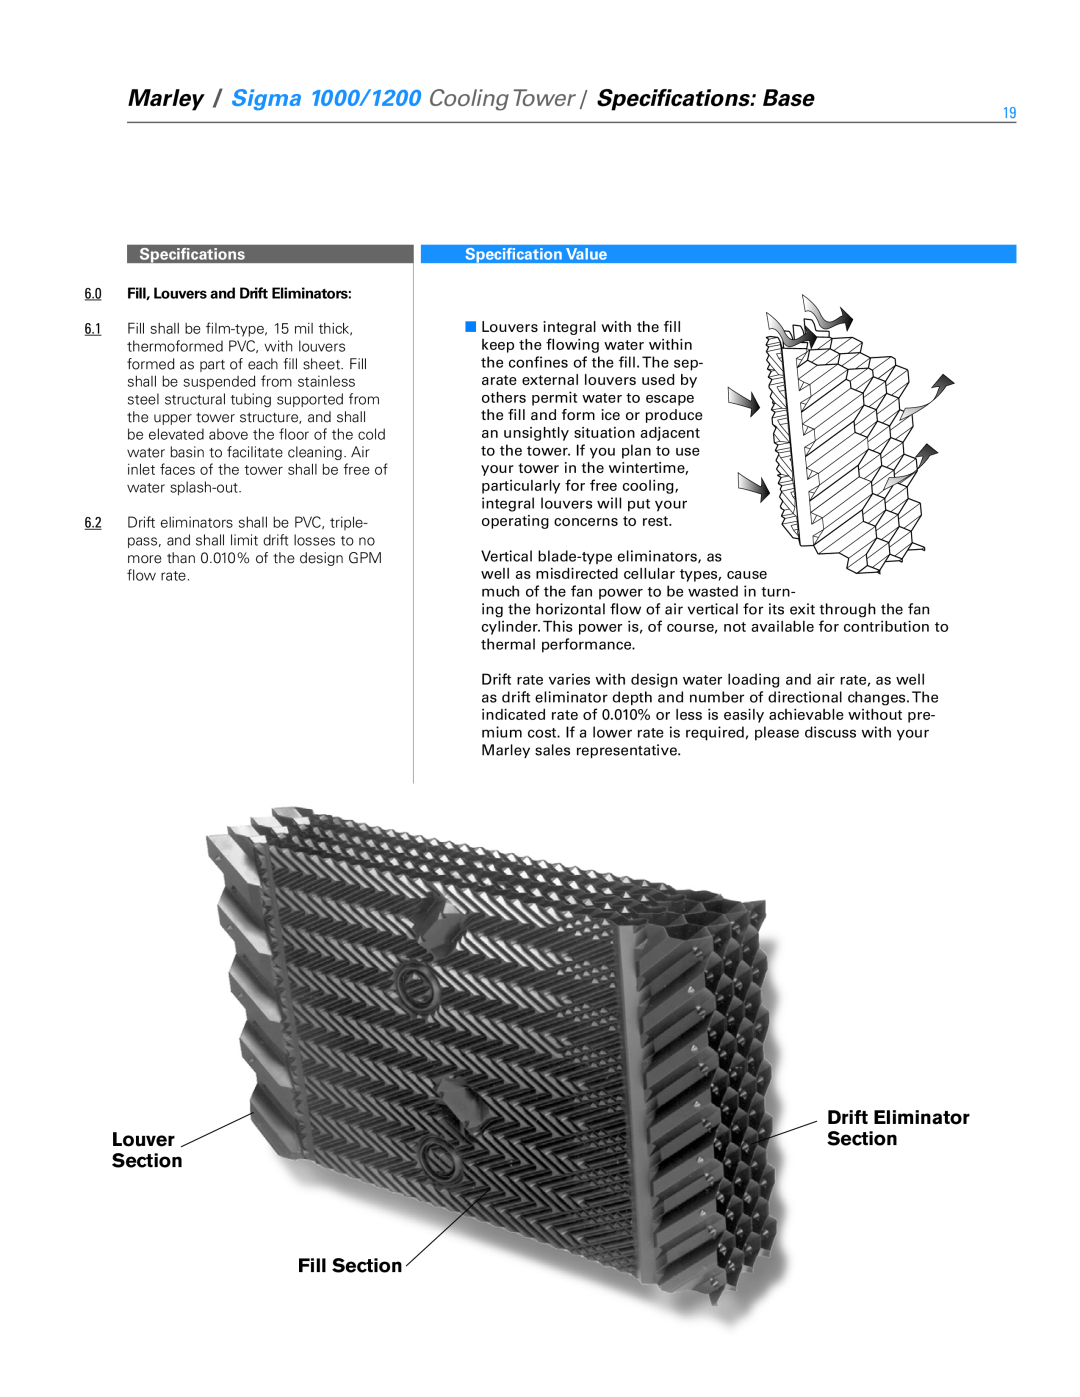 SPX Cooling Technologies 1000 Louver Section Fill Section, Drift Eliminator Section, Specifications, Specification Value 